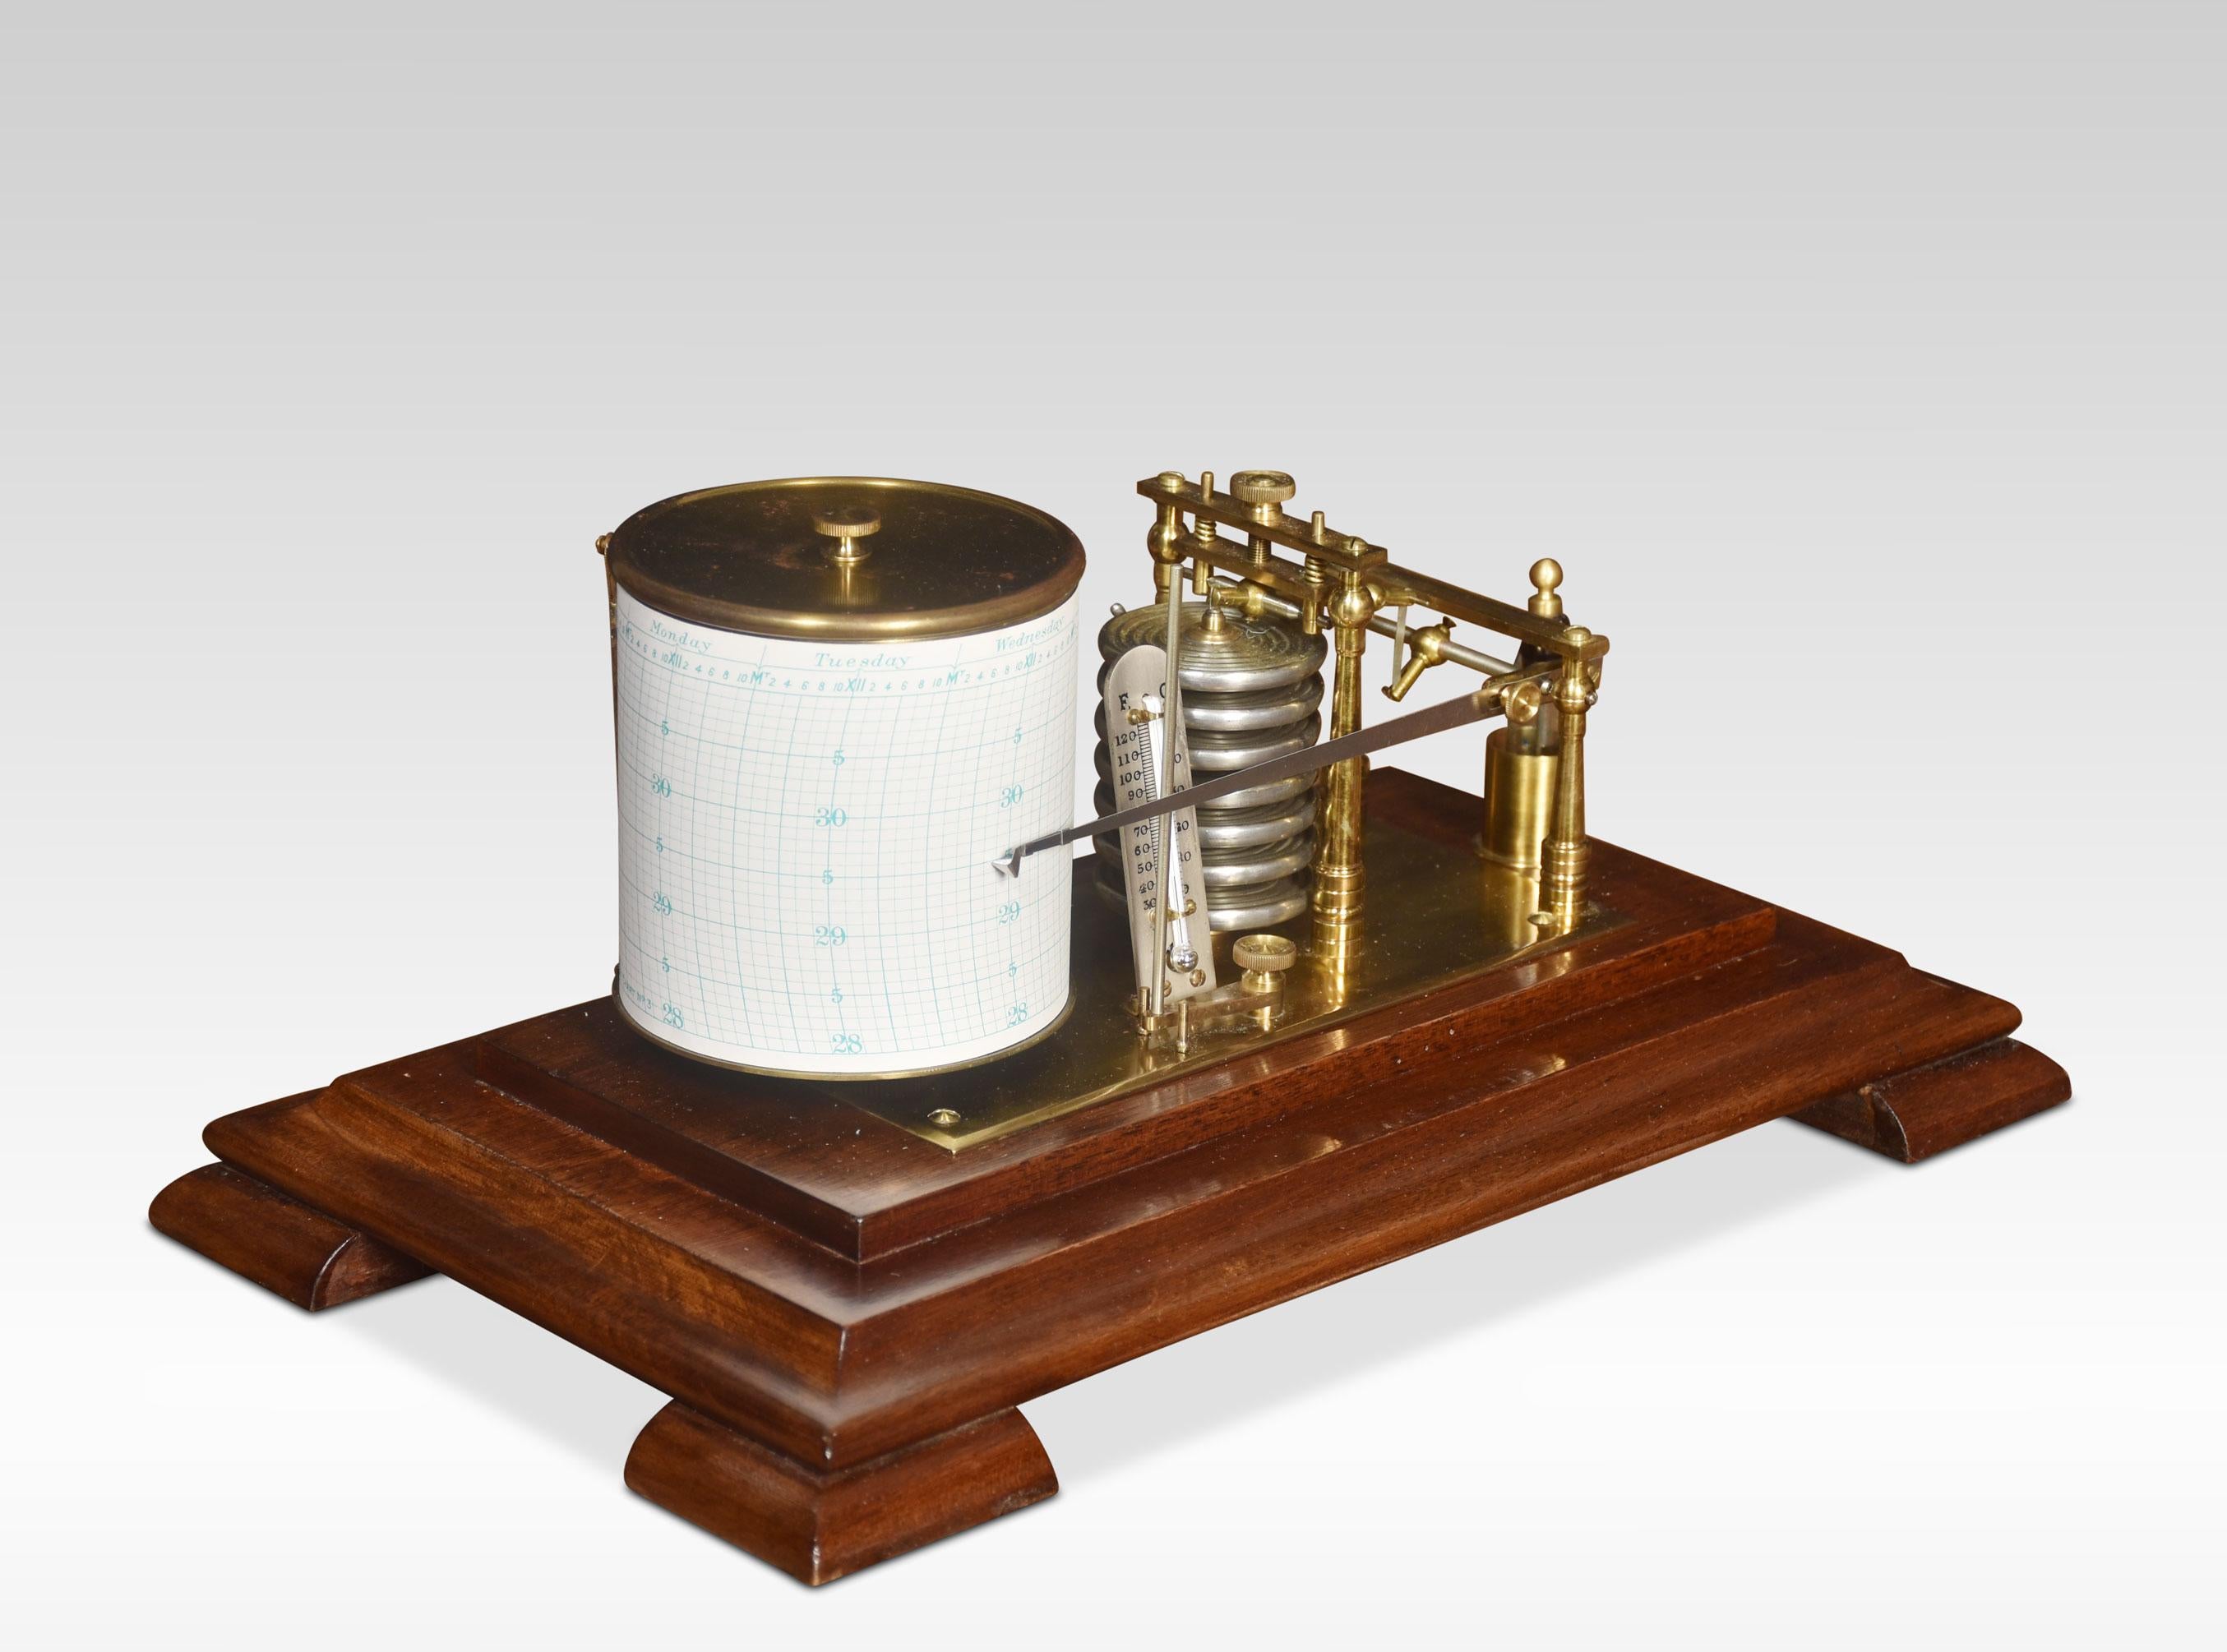 Walnut Cased Barograph, having five glazed removable lid. The mechanical eight-day movement is housed in the drum, fitted with a seven-day chart that covers one full rotation of the drum. The ink trace, or barogram, on the recording paper, is a